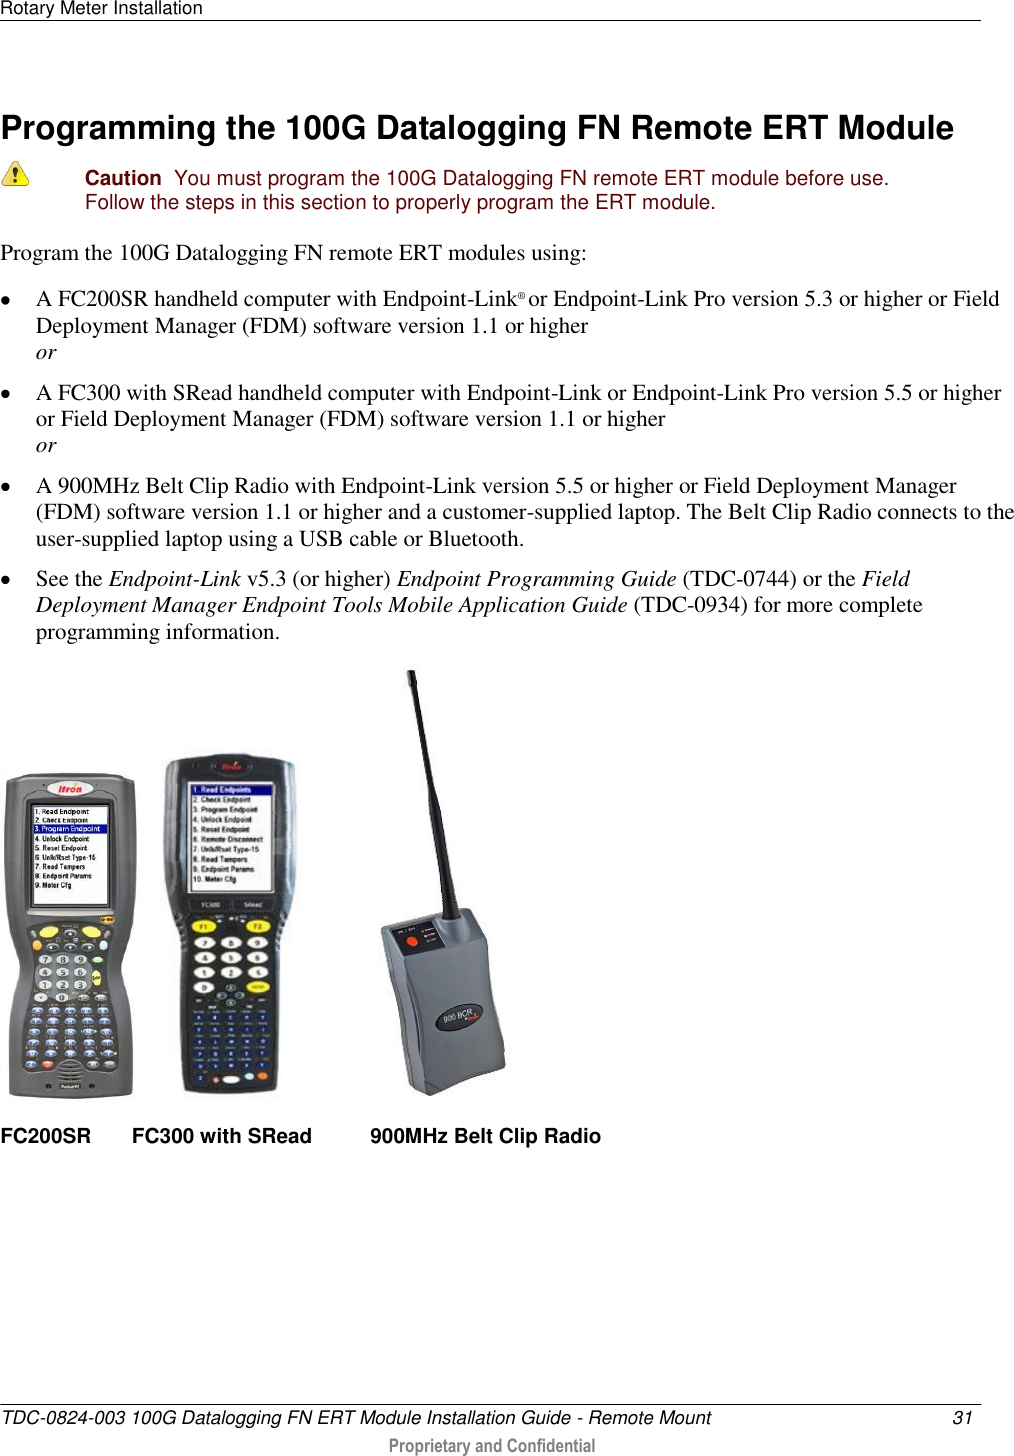 Rotary Meter Installation   TDC-0824-003 100G Datalogging FN ERT Module Installation Guide - Remote Mount  31   Proprietary and Confidential     Programming the 100G Datalogging FN Remote ERT Module   Caution  You must program the 100G Datalogging FN remote ERT module before use. Follow the steps in this section to properly program the ERT module.  Program the 100G Datalogging FN remote ERT modules using:  A FC200SR handheld computer with Endpoint-Link® or Endpoint-Link Pro version 5.3 or higher or Field Deployment Manager (FDM) software version 1.1 or higher or  A FC300 with SRead handheld computer with Endpoint-Link or Endpoint-Link Pro version 5.5 or higher or Field Deployment Manager (FDM) software version 1.1 or higher or  A 900MHz Belt Clip Radio with Endpoint-Link version 5.5 or higher or Field Deployment Manager (FDM) software version 1.1 or higher and a customer-supplied laptop. The Belt Clip Radio connects to the user-supplied laptop using a USB cable or Bluetooth.  See the Endpoint-Link v5.3 (or higher) Endpoint Programming Guide (TDC-0744) or the Field Deployment Manager Endpoint Tools Mobile Application Guide (TDC-0934) for more complete programming information.       FC200SR       FC300 with SRead          900MHz Belt Clip Radio     